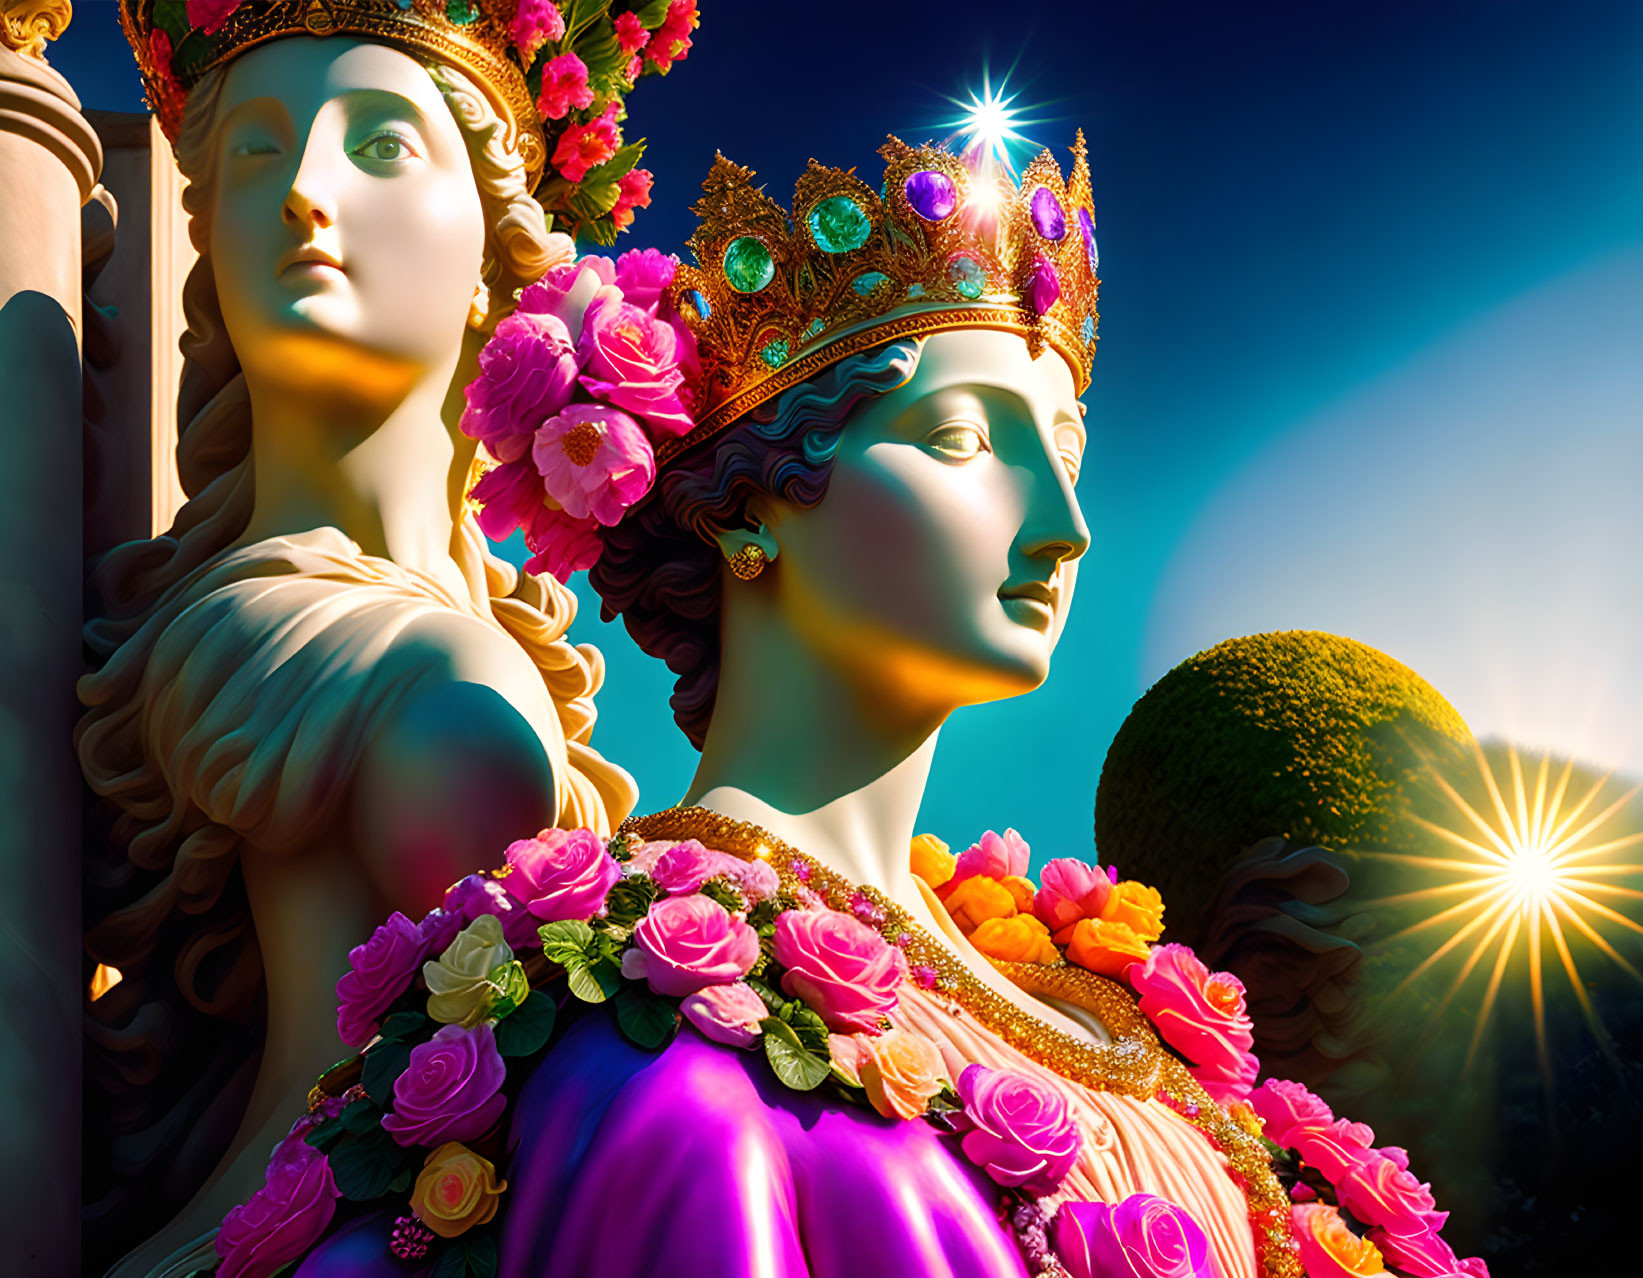 Vibrant statues of regal women in floral crowns and dresses under a sunny sky